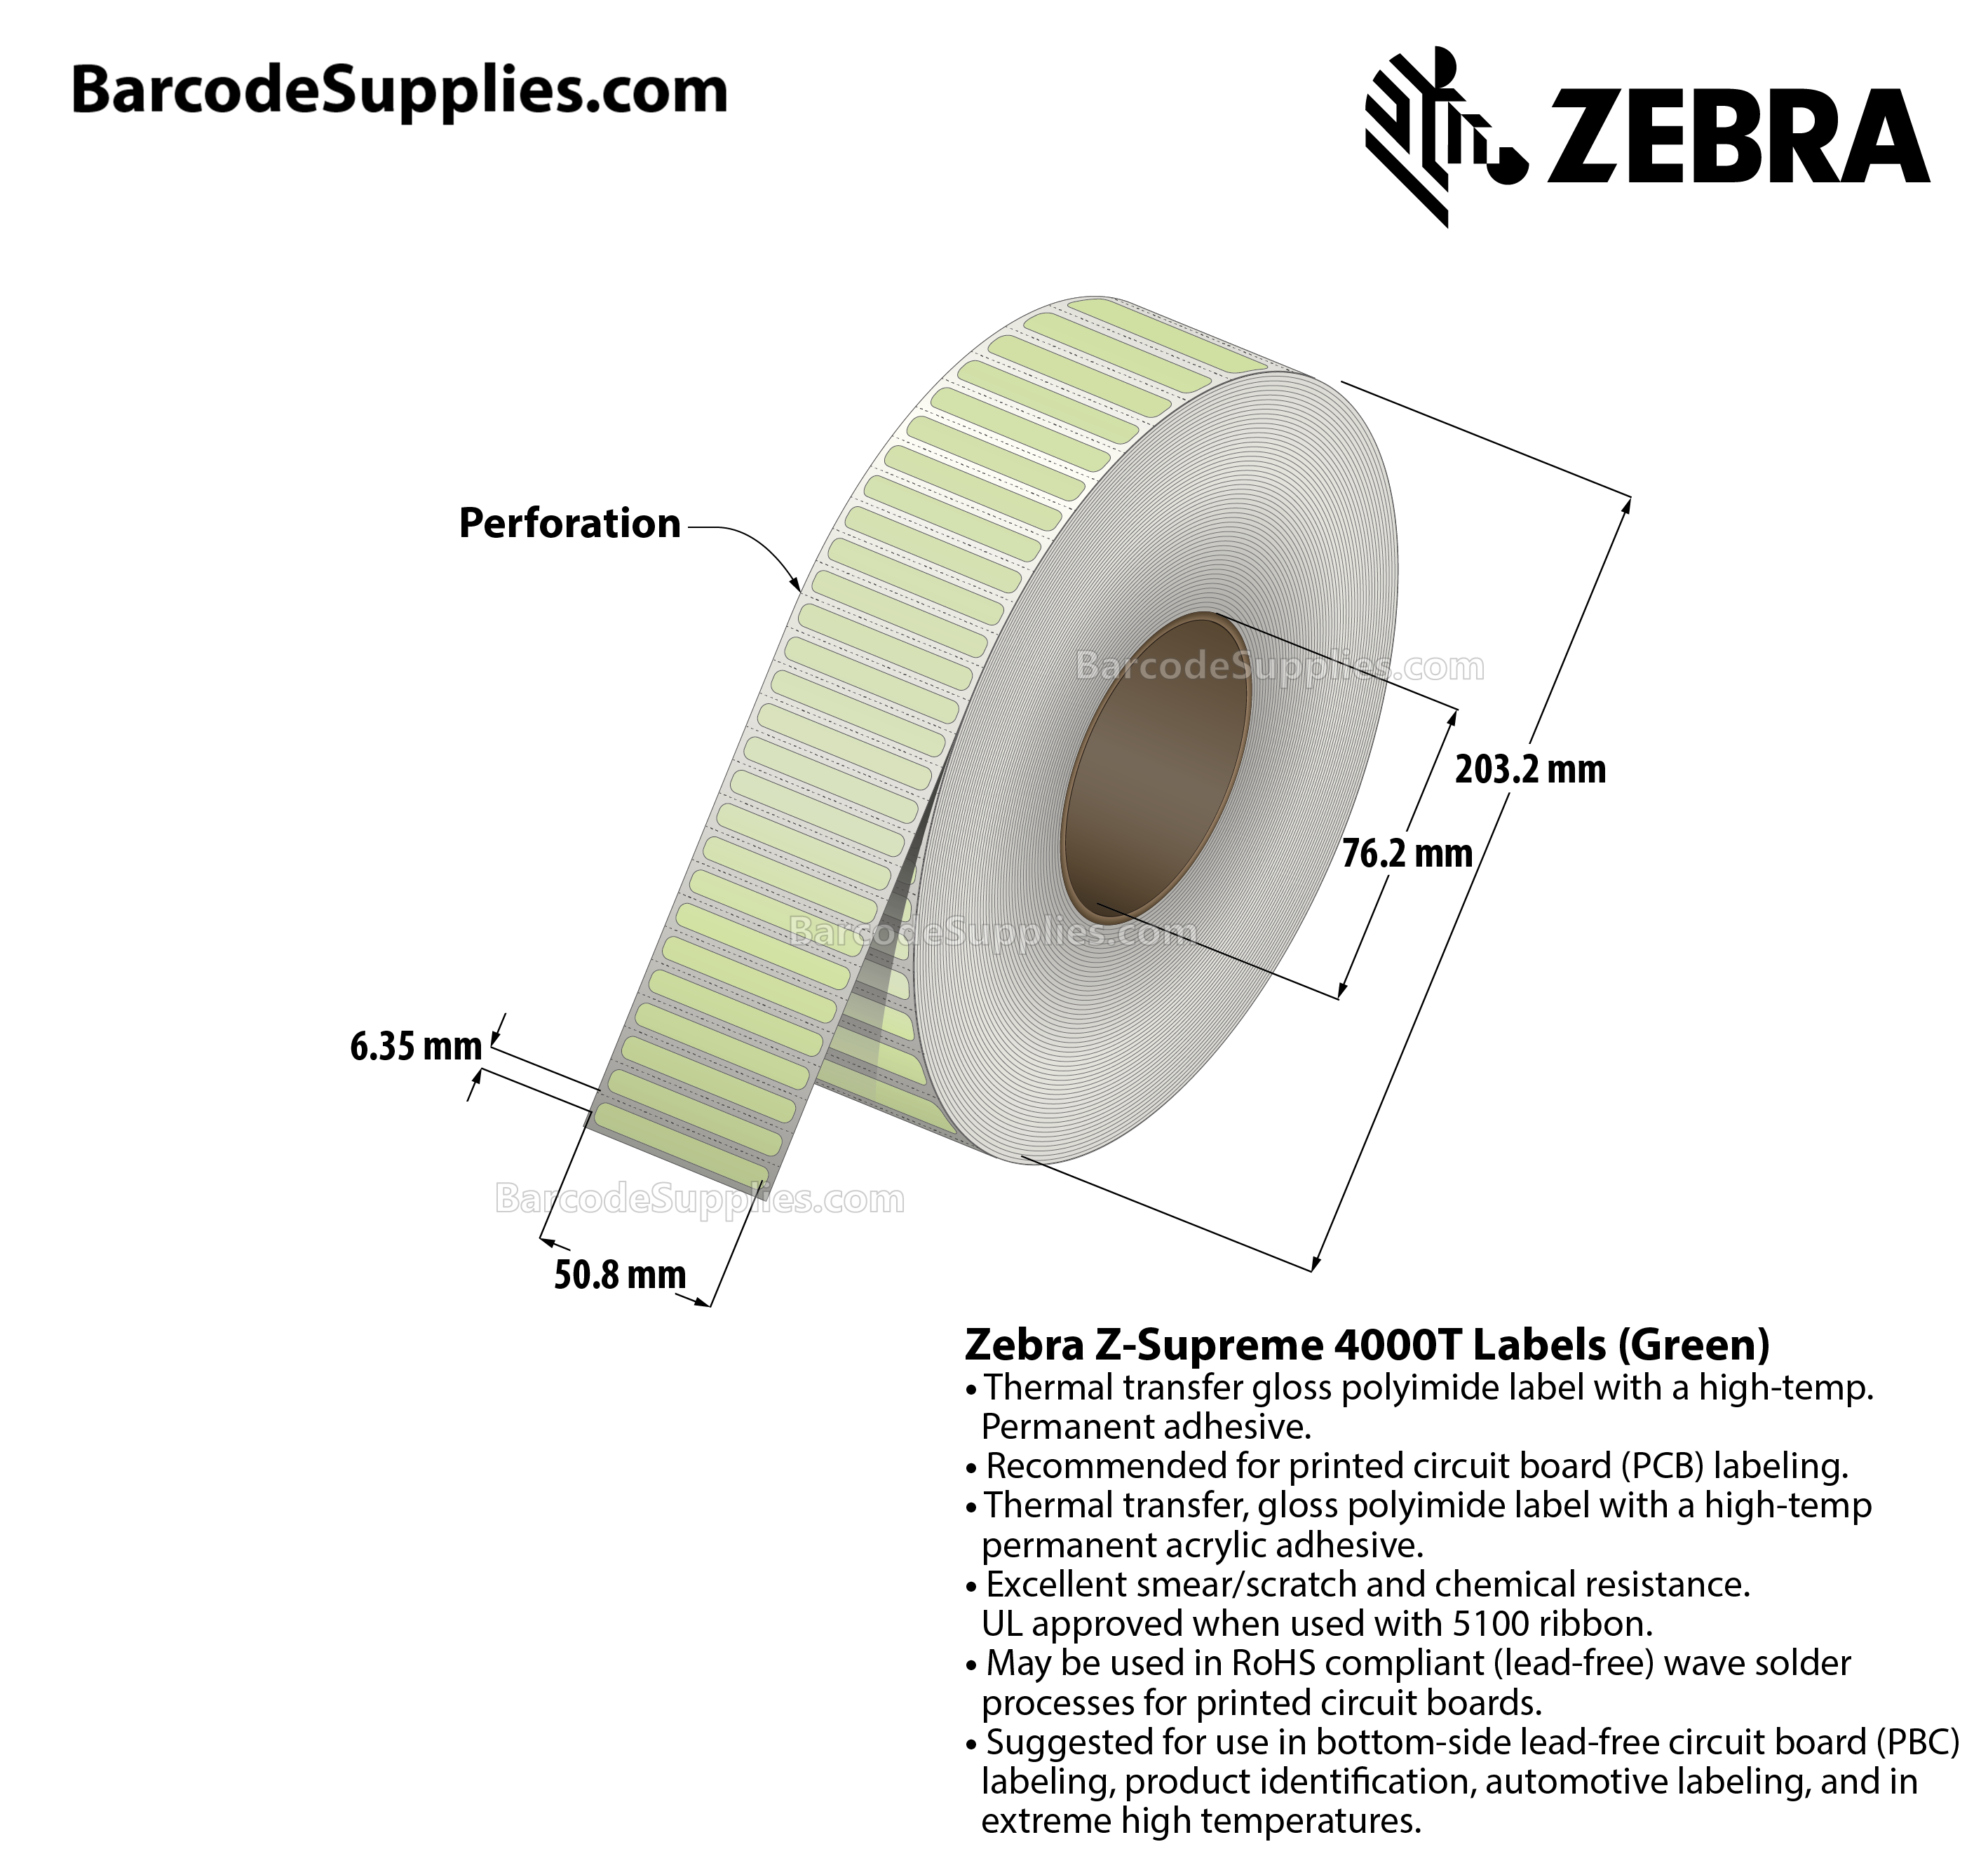 2 x 0.25 Thermal Transfer Green Z-Supreme 4000T Green Labels With High-temp Adhesive - Perforated - 10000 Labels Per Roll - Carton Of 1 Rolls - 10000 Labels Total - MPN: 10023322